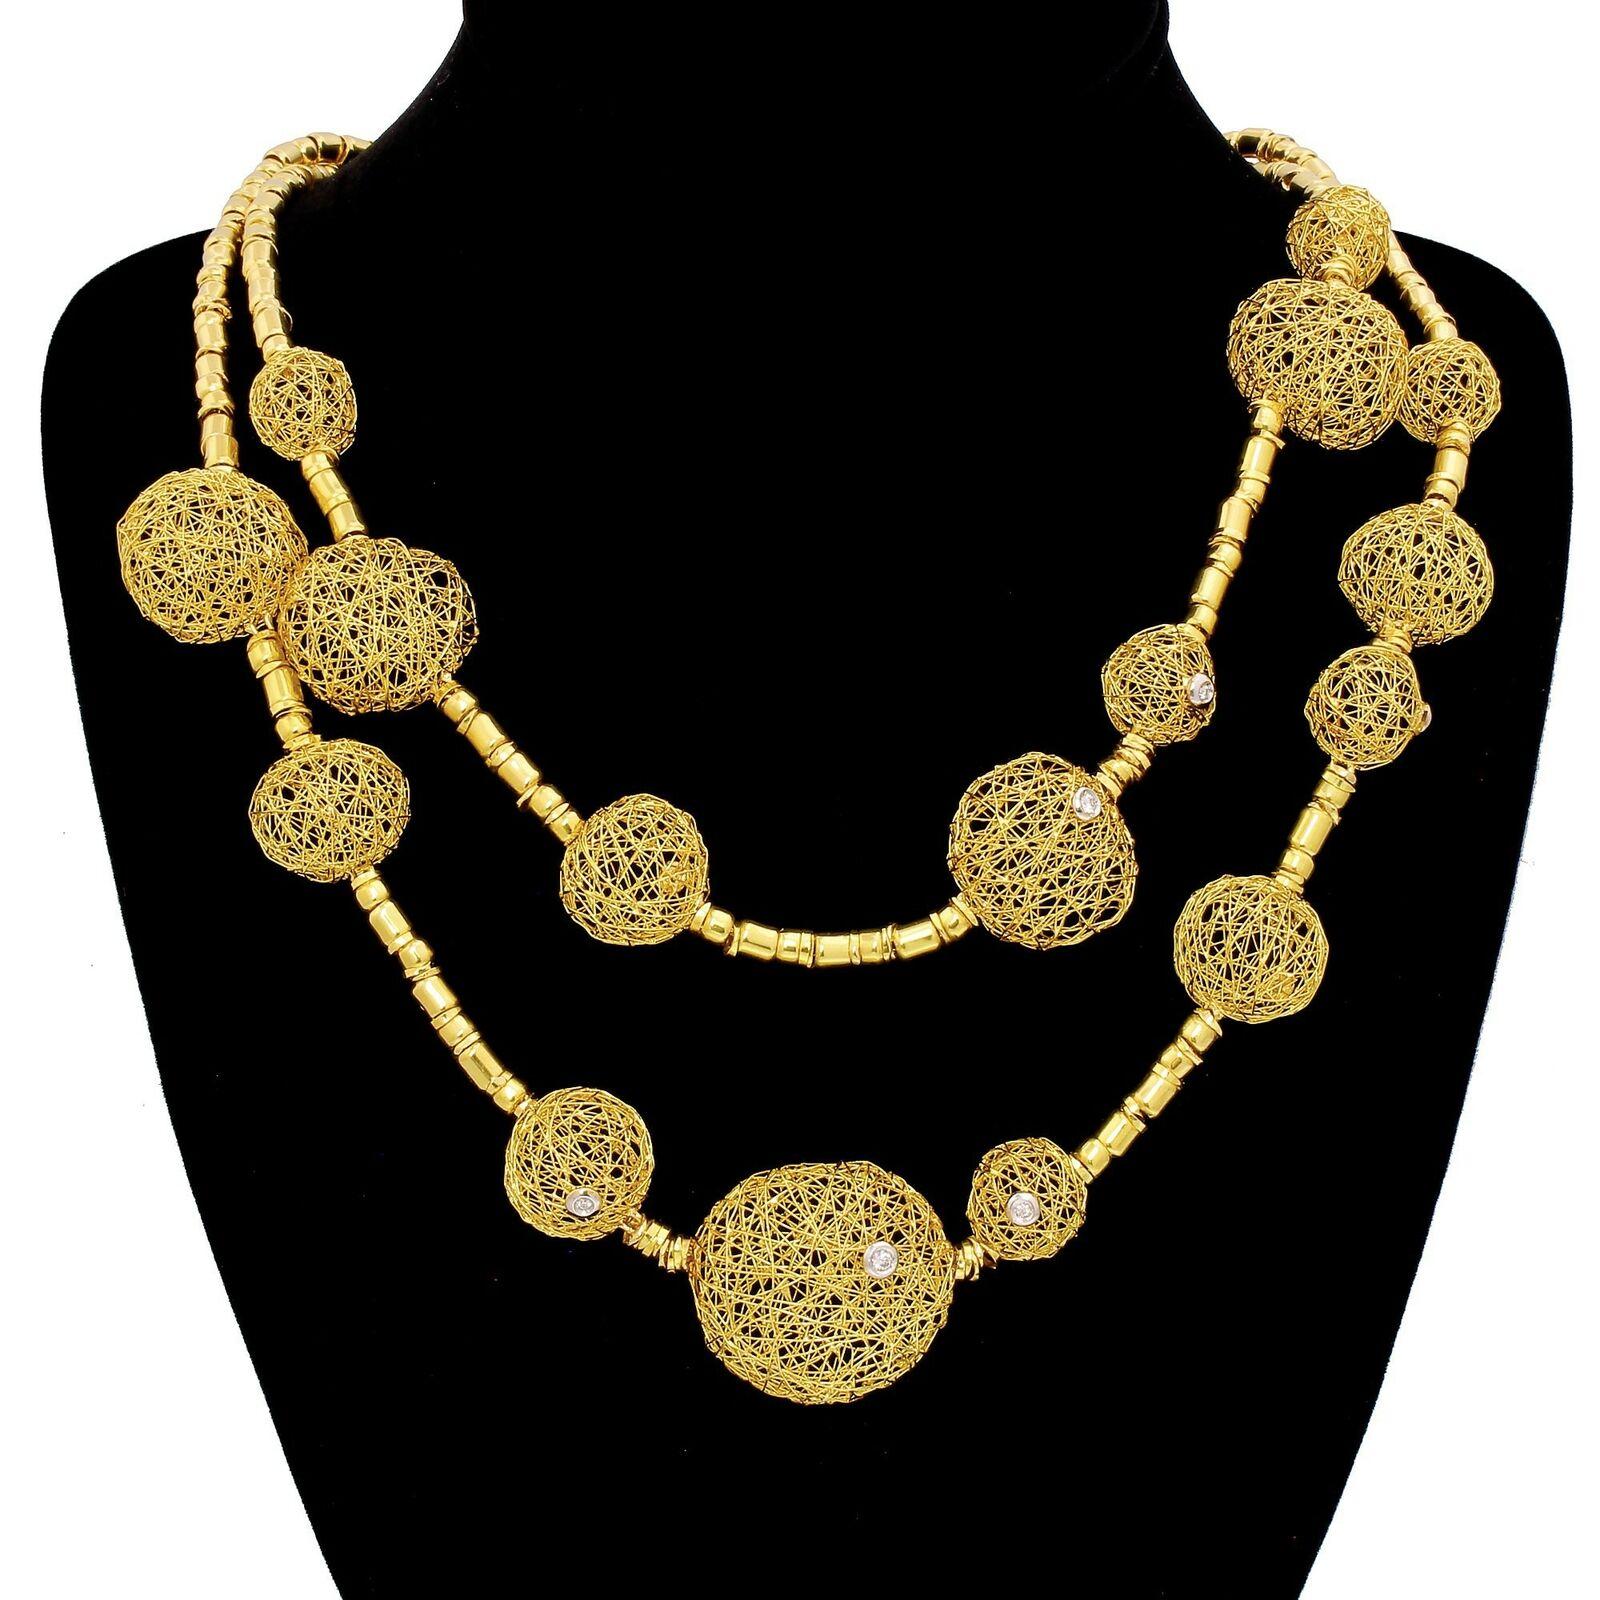 Details & Condition: Spectacular couture Orlando Orlandini Atelier 18kt Gold and diamond double row necklace from Italy.
This amazing necklace has been created entirely by hand, every sphere is unique, no two are ever identical and every link, chain